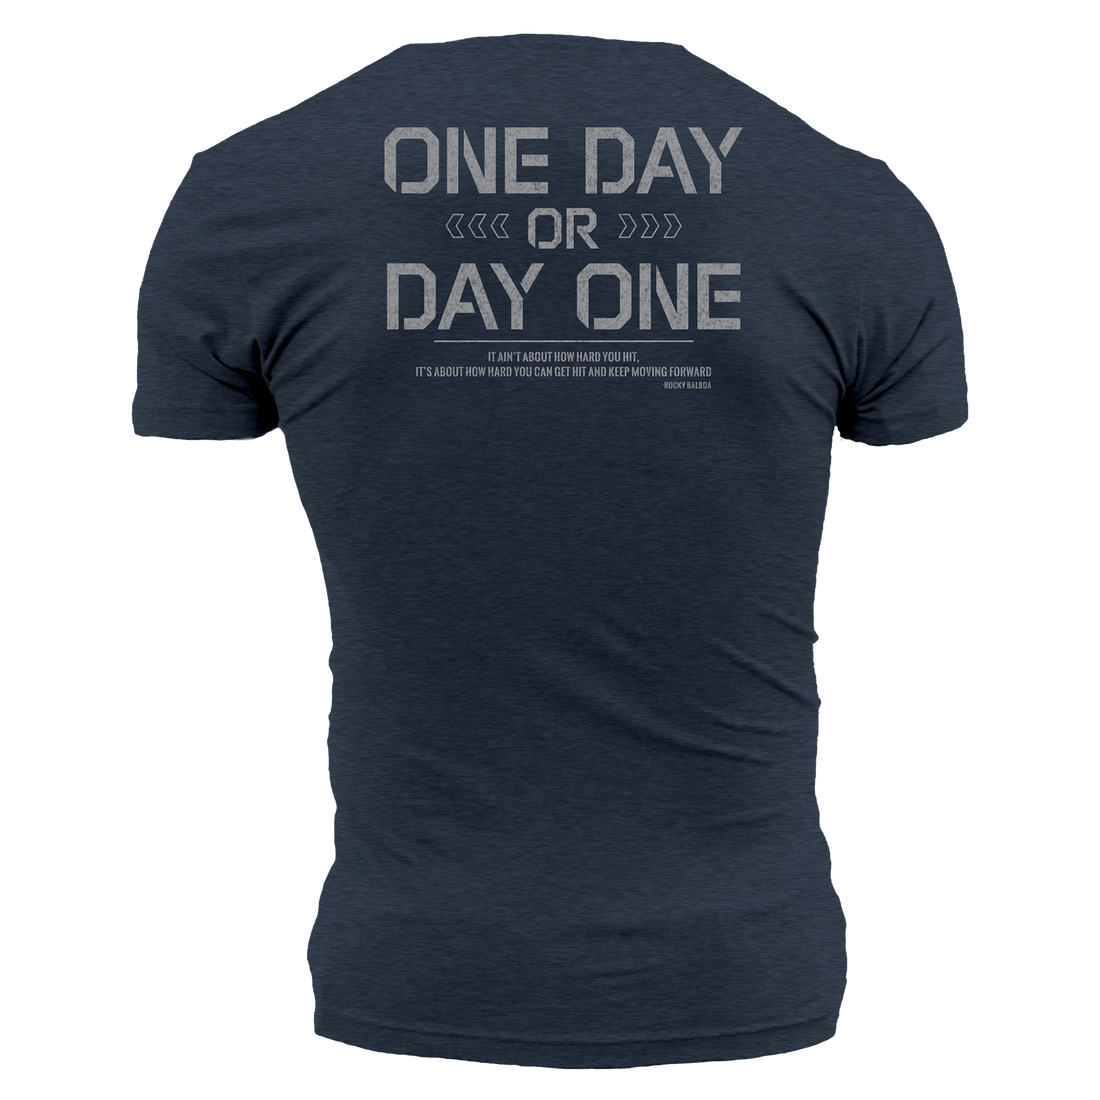 It's Nate - One Day Or Day One T-Shirt - Midnight Navy